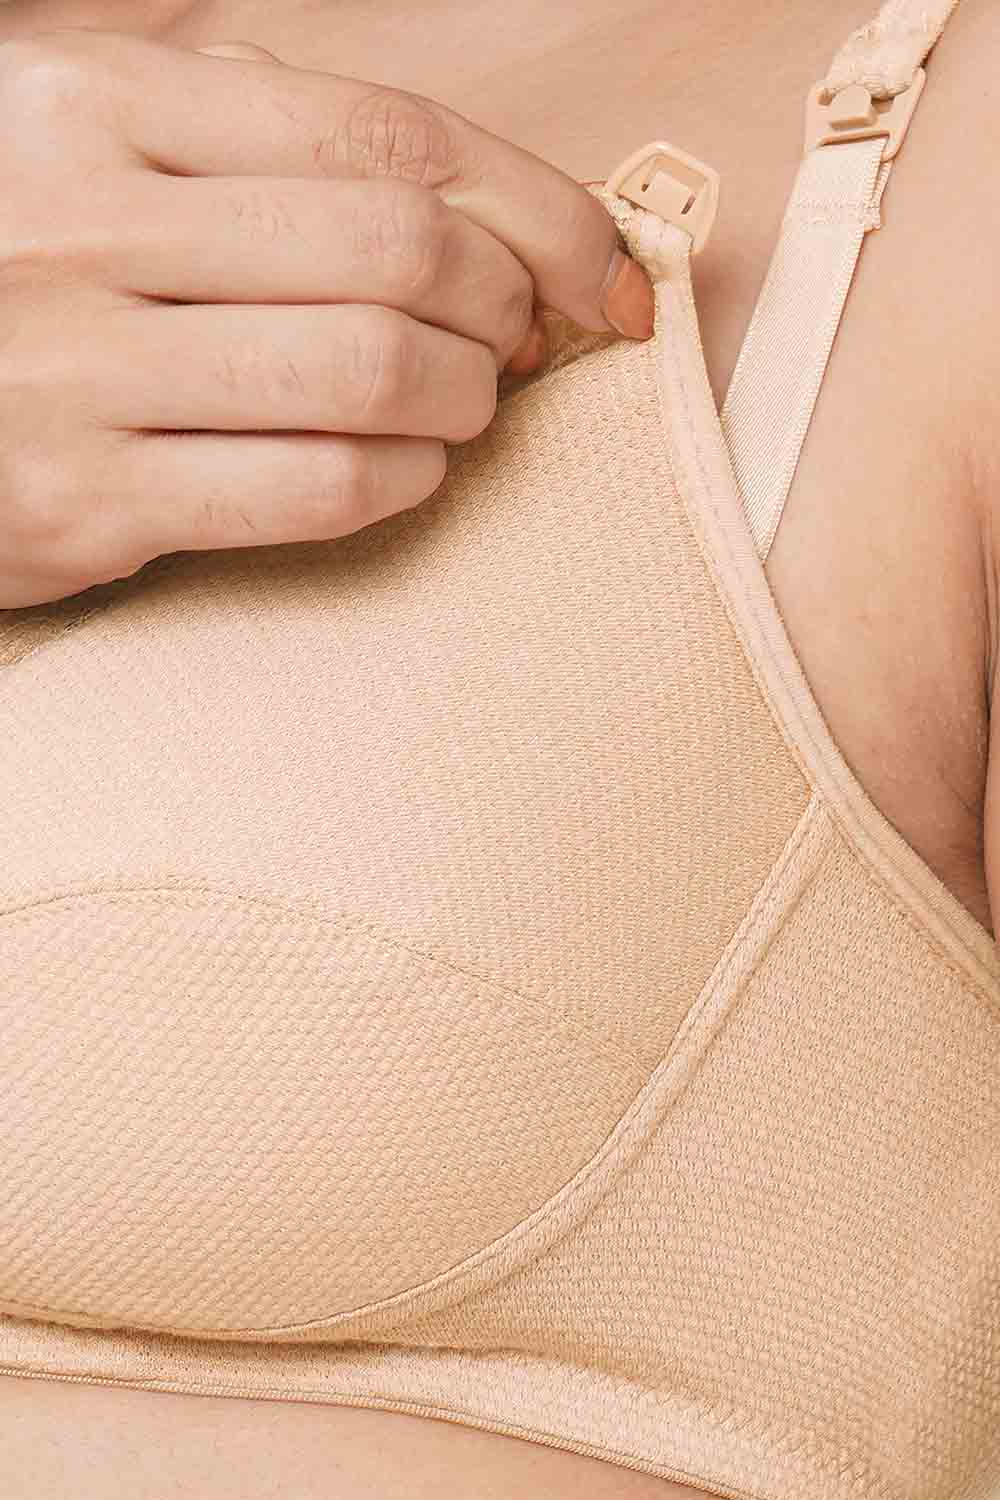 Buy InnerSense Organic & Antimicrobial Double Layered Wirefree Nursing Bra  - Skin at Rs.537 online